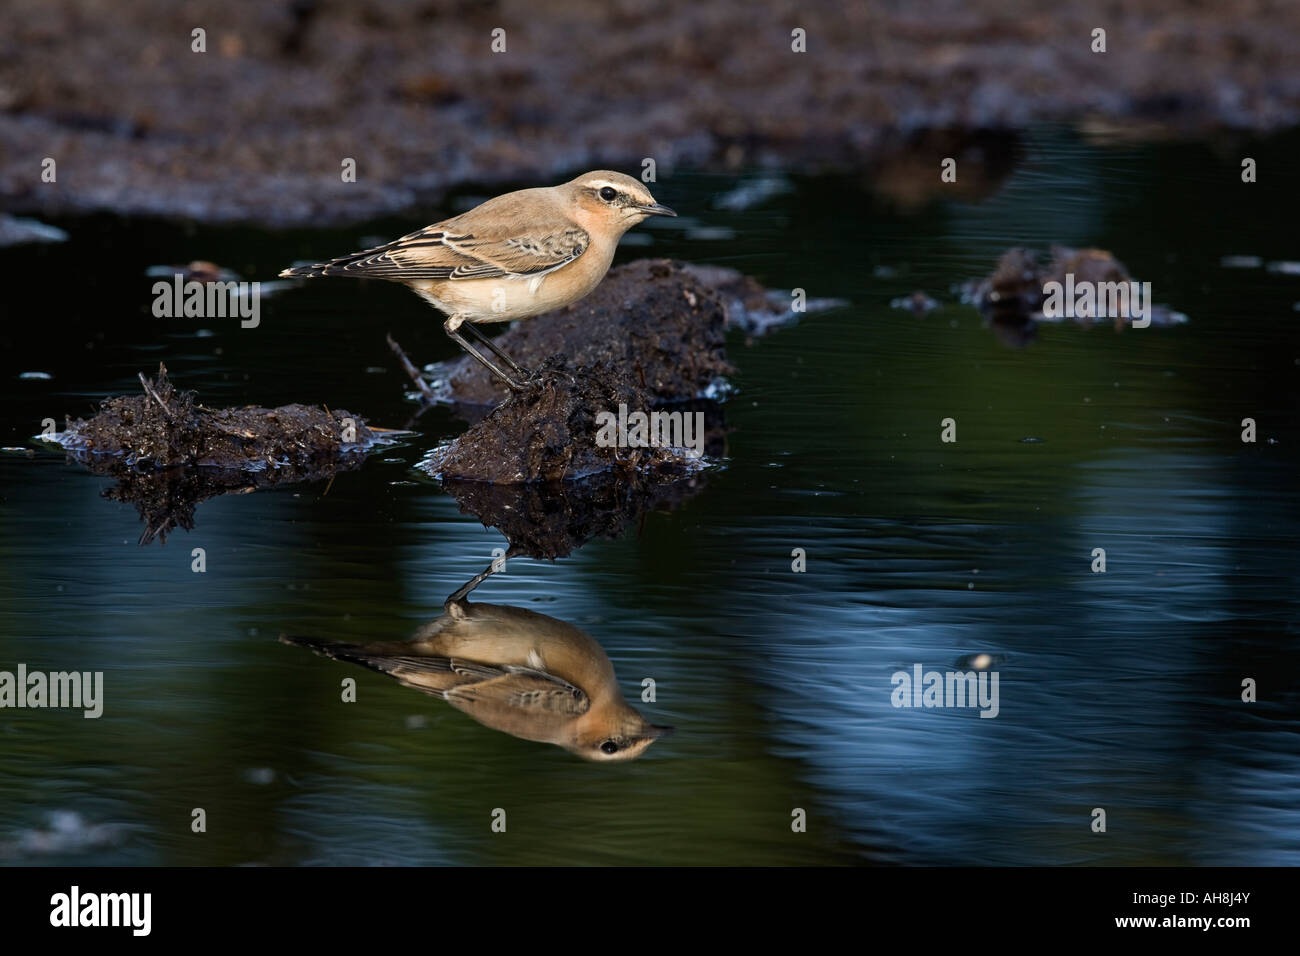 Wheatear Oenanthe oenanthe perched on soil clod near puddle with reflection Ashwell hertfordshire Stock Photo